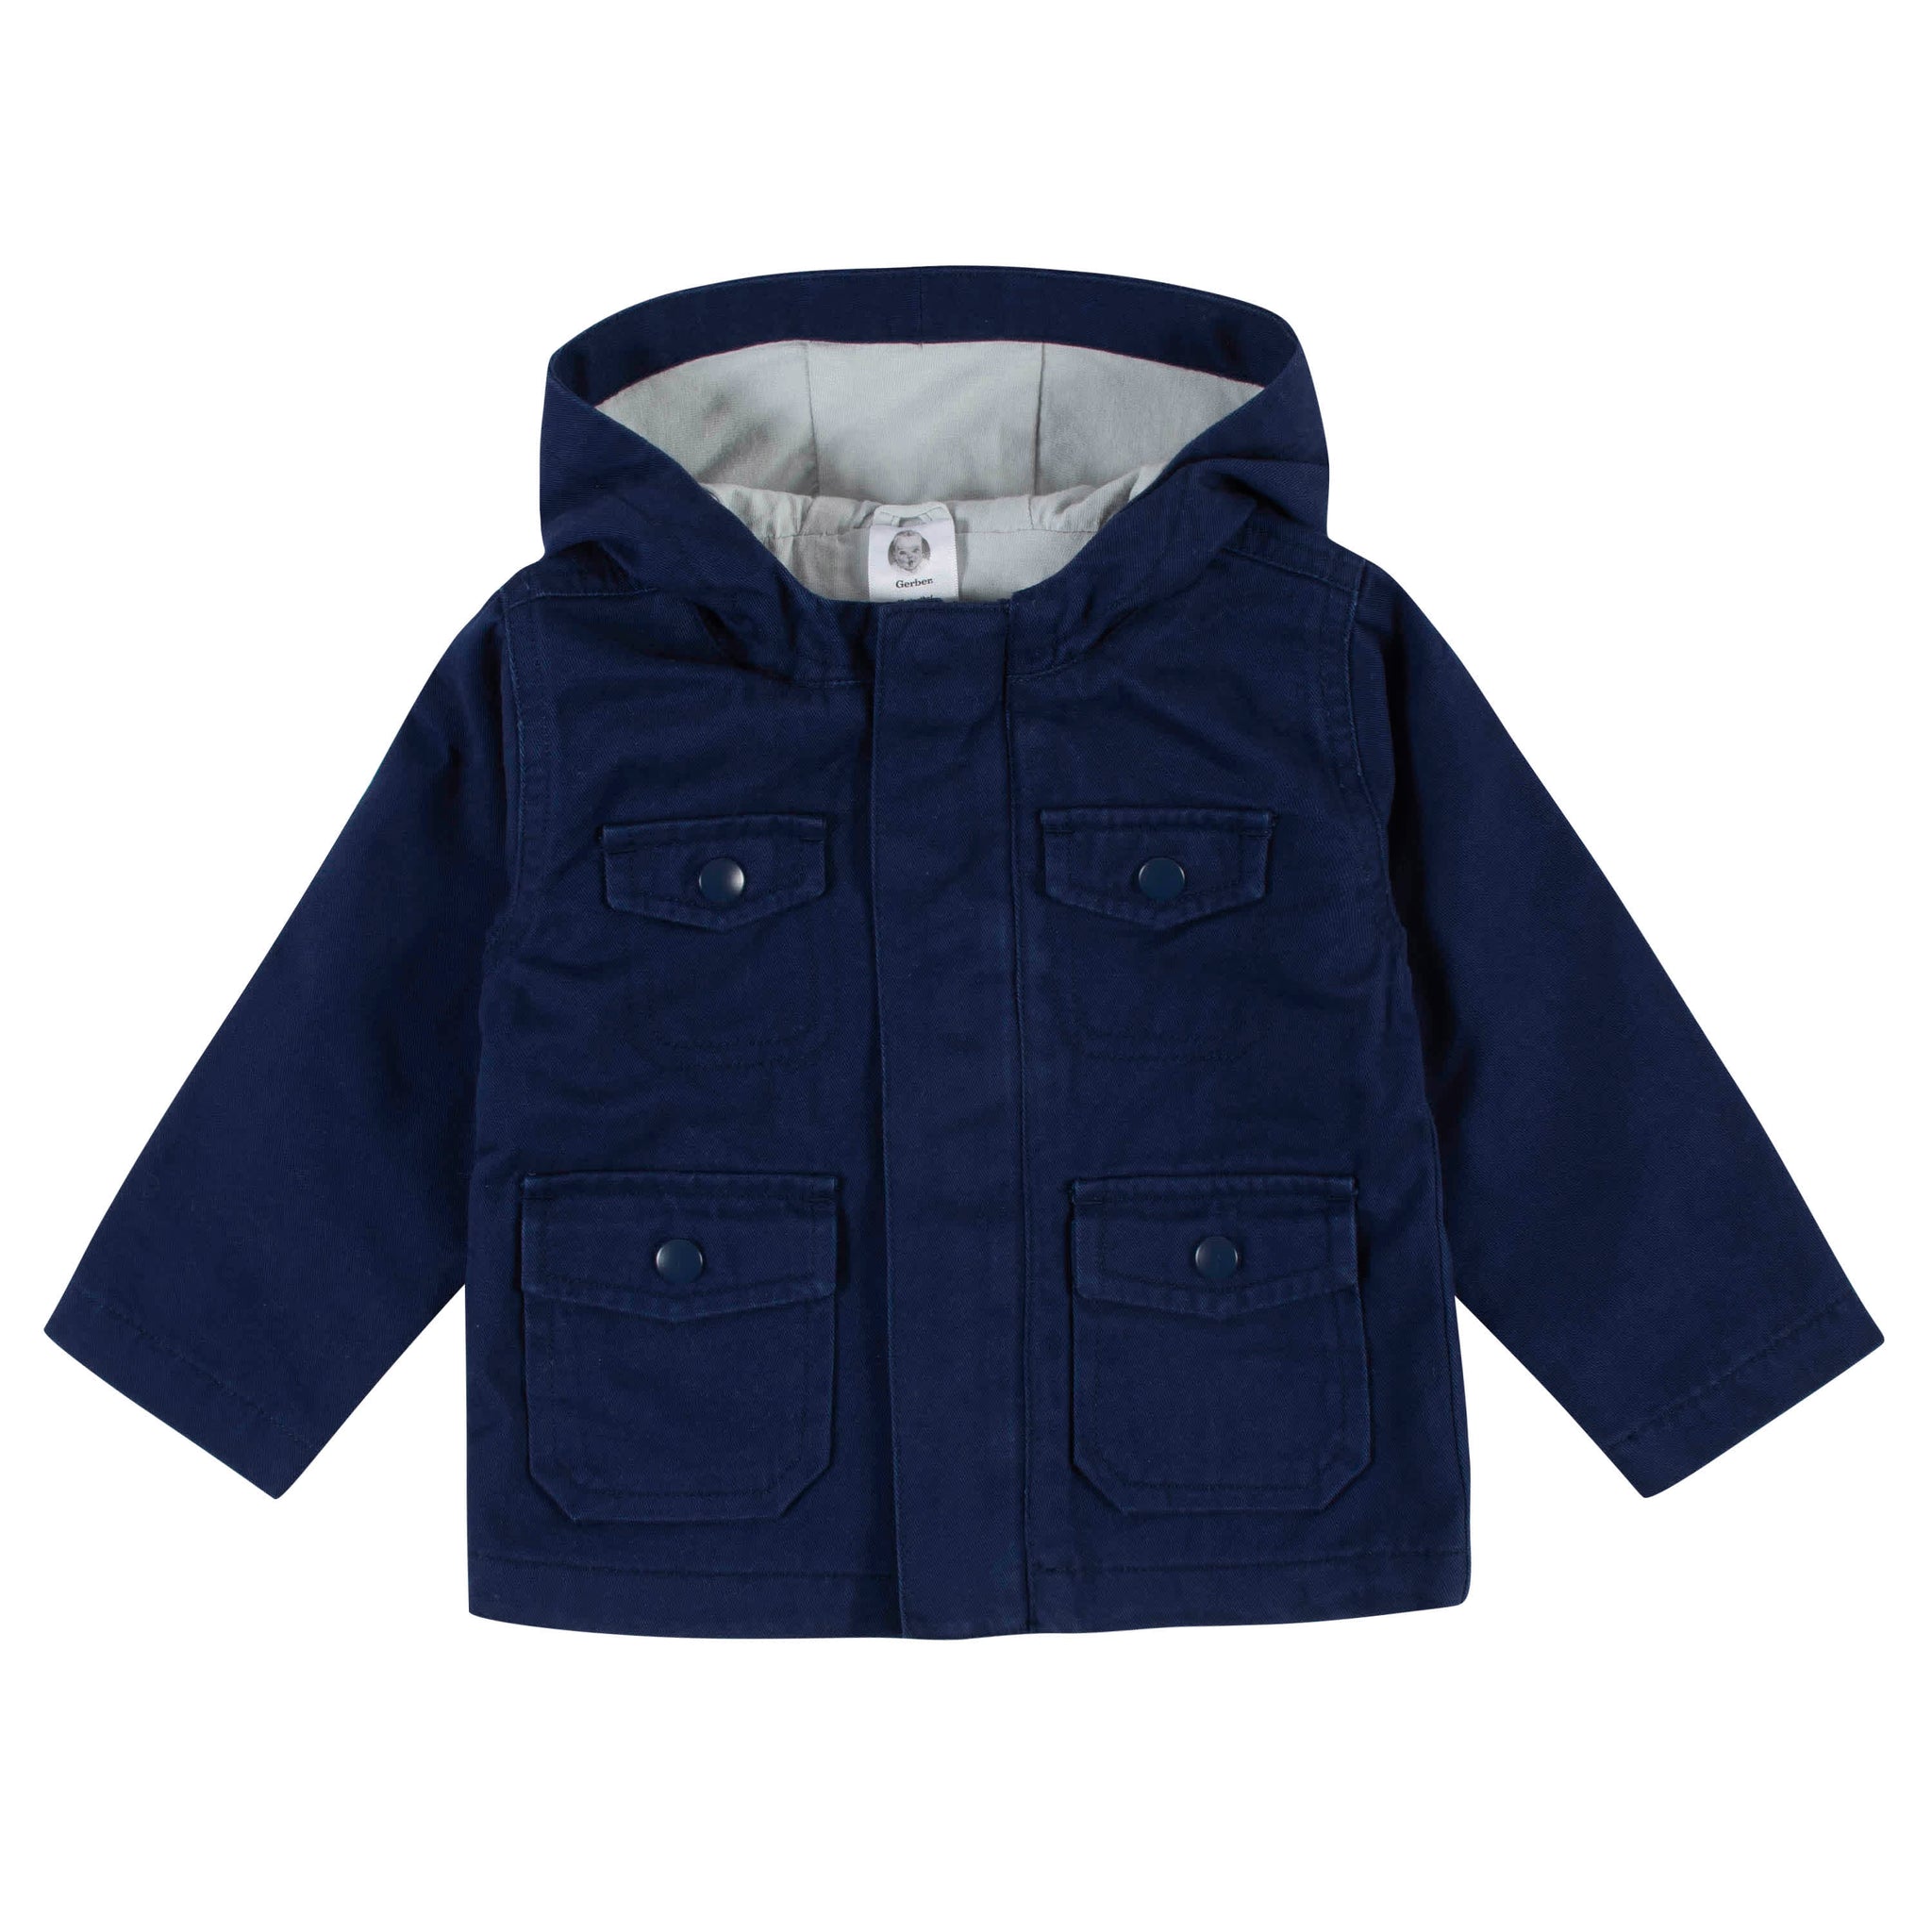 Infant & Toddler Navy Hooded Cotton Twill Utility Jacket-Gerber Childrenswear Wholesale